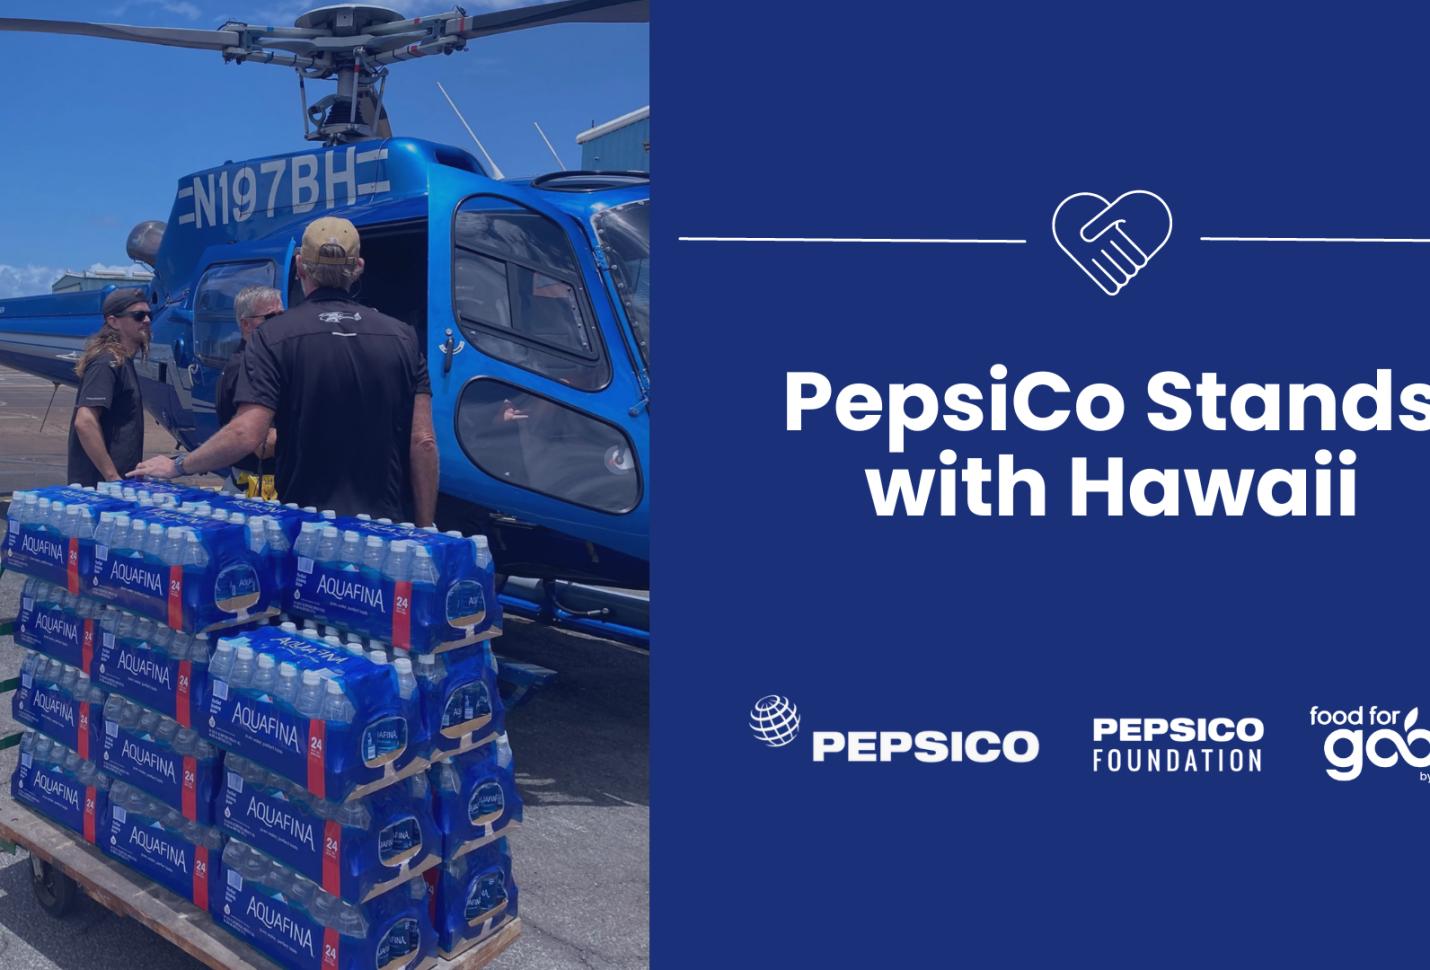 PepsiCo provides $ 150,000 to support relief efforts of Hawaii wildfires